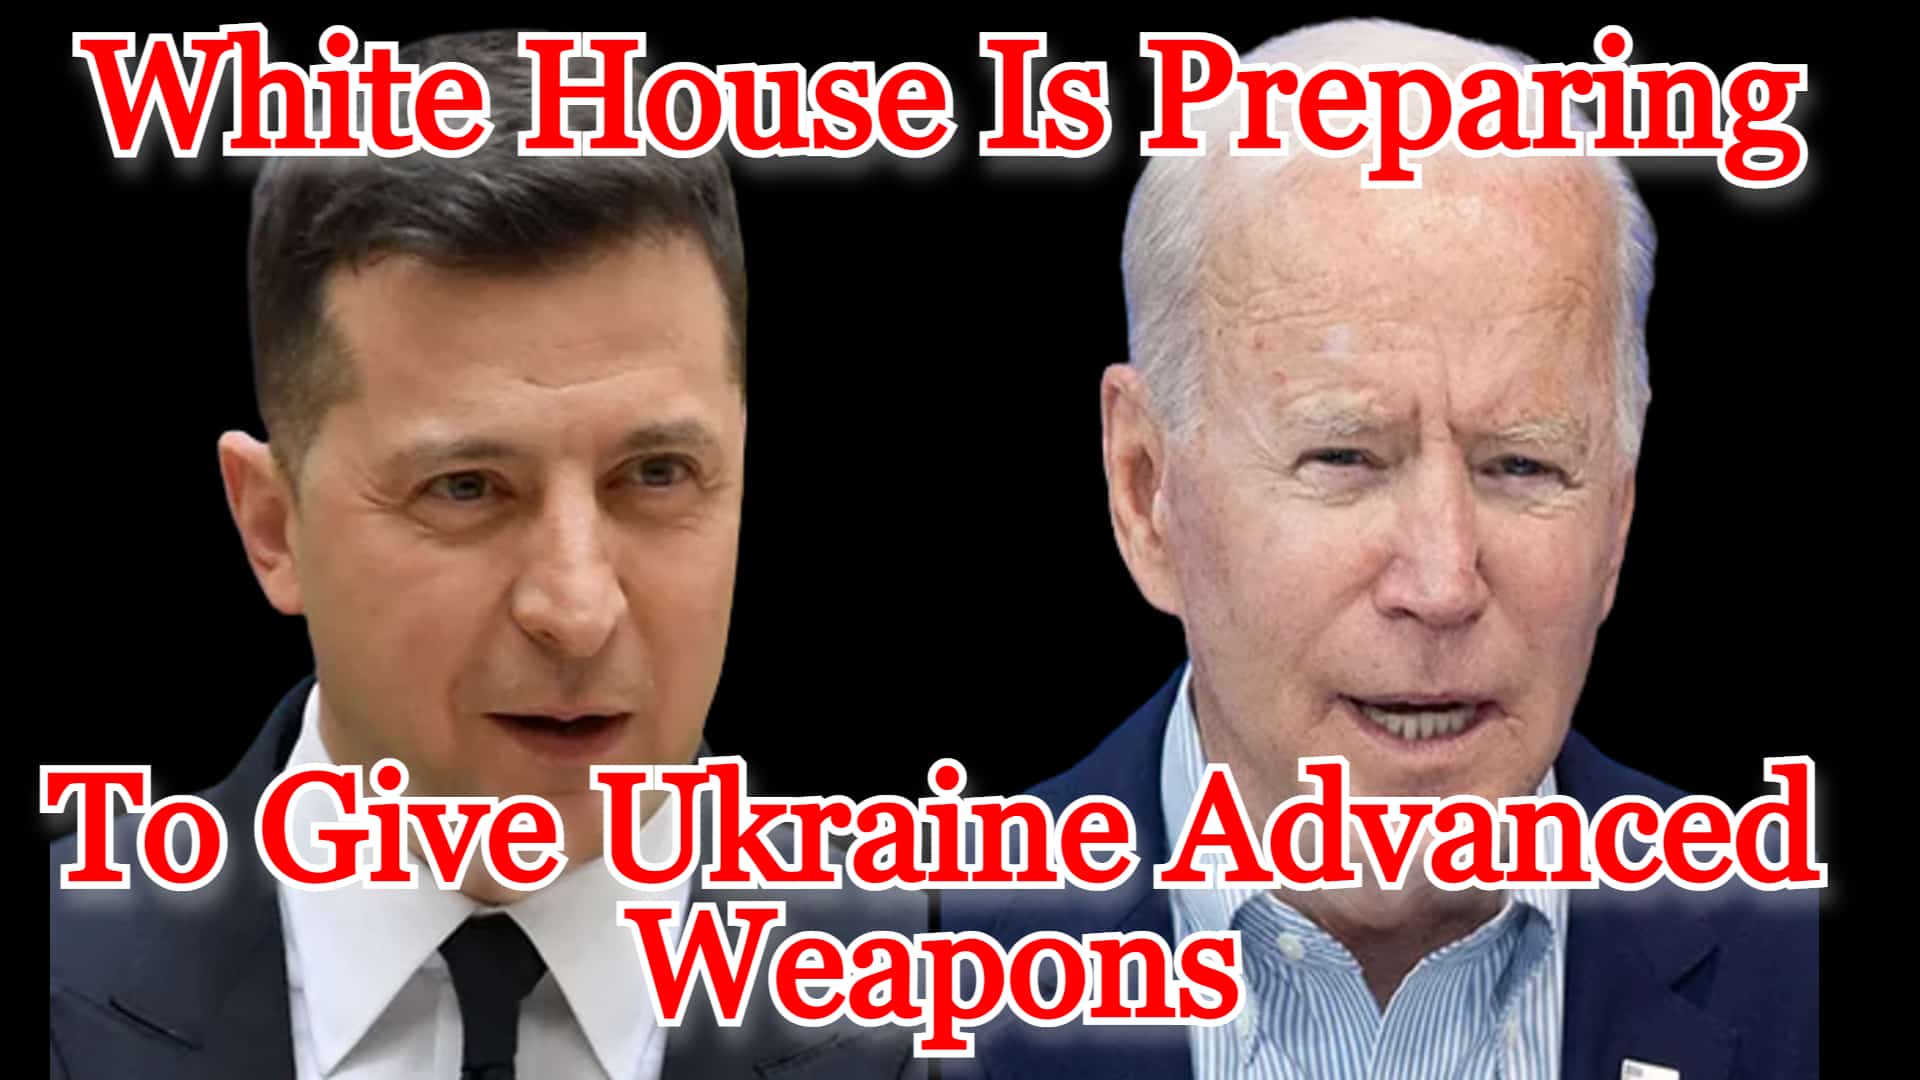 COI #363: White House Is Preparing to Give Ukraine Advanced Weapons